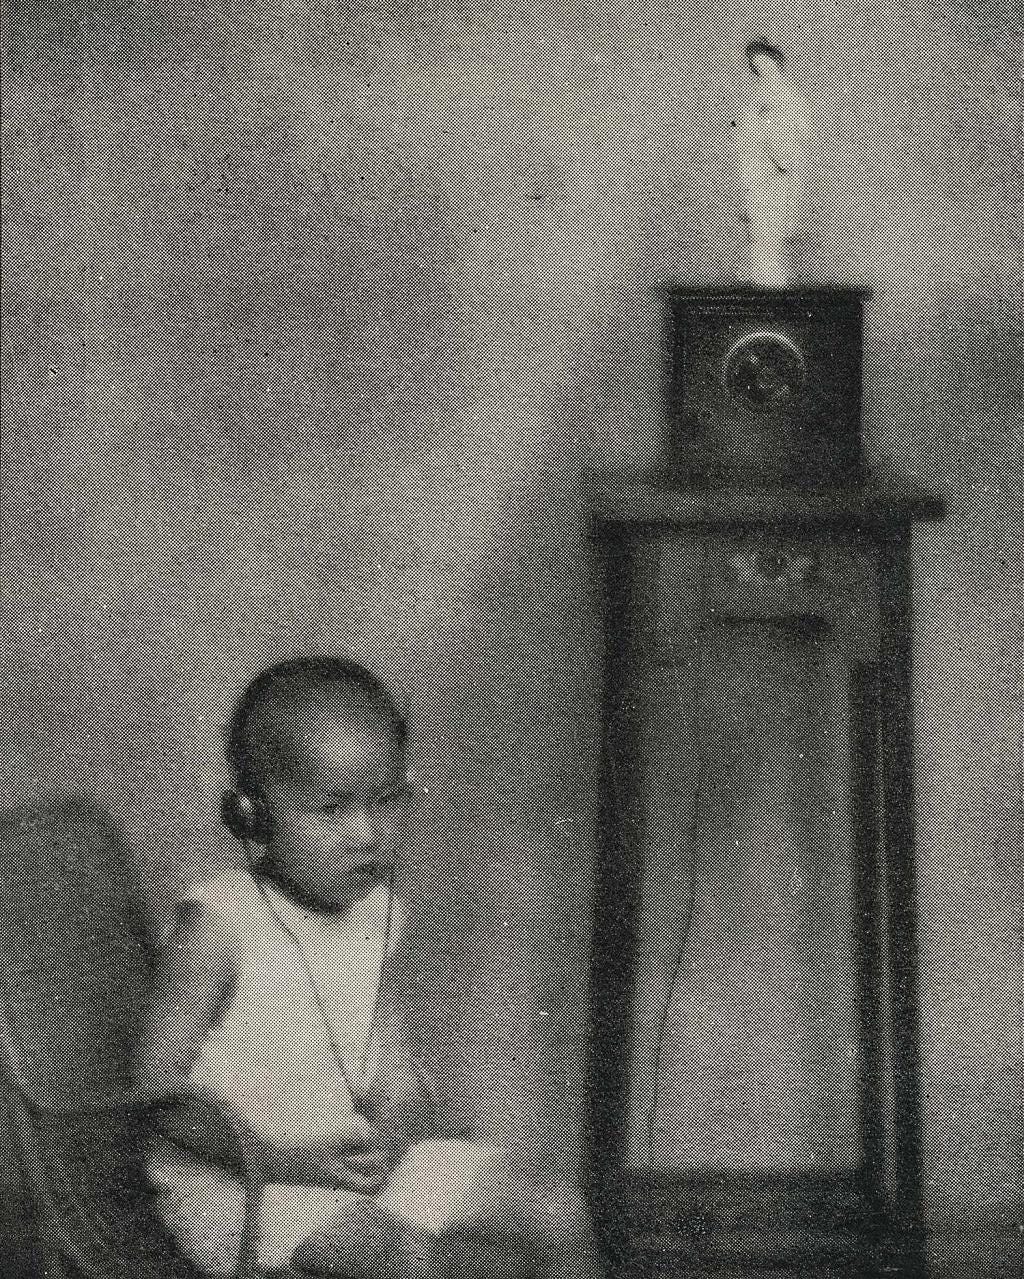 A young boy listens to the radio with headphones